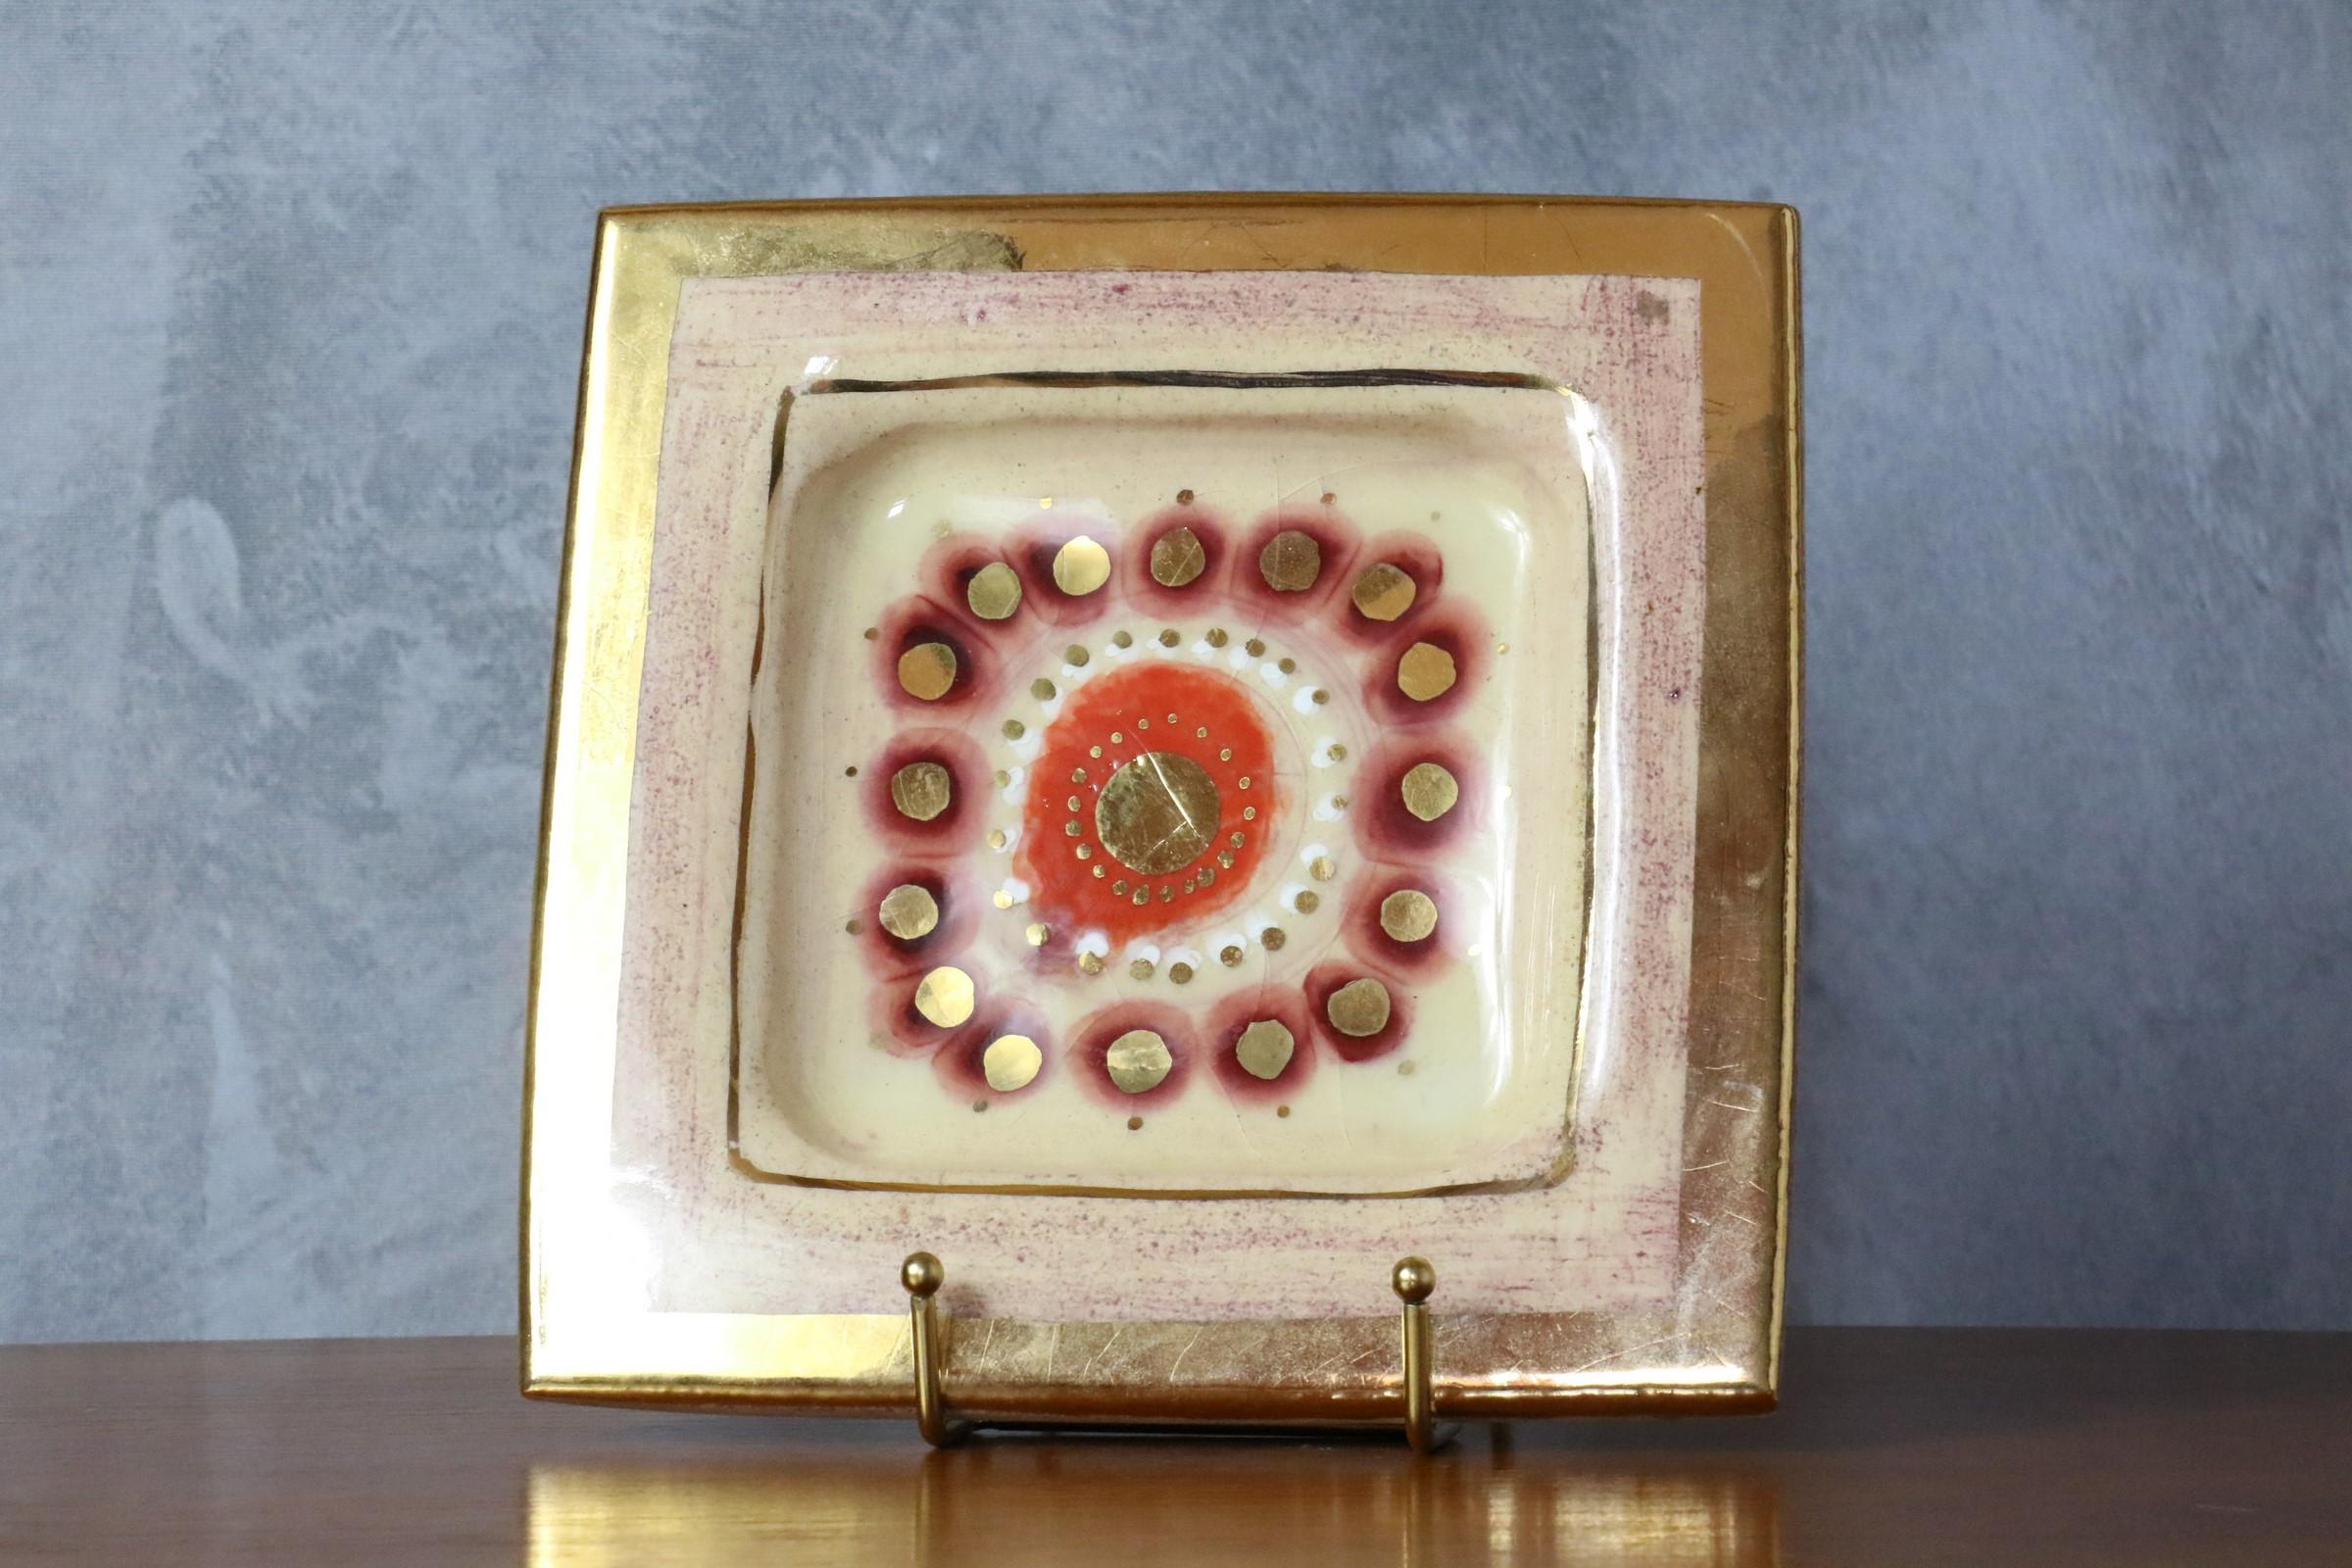 French ceramic vide-poche or decorative plate by Georges Pelletier, 1970s

The ceramic proposed here has an attractive design in deep shades of gold and red on a creamy white background with circular patterns. Handmade, it is glazed with a glossy